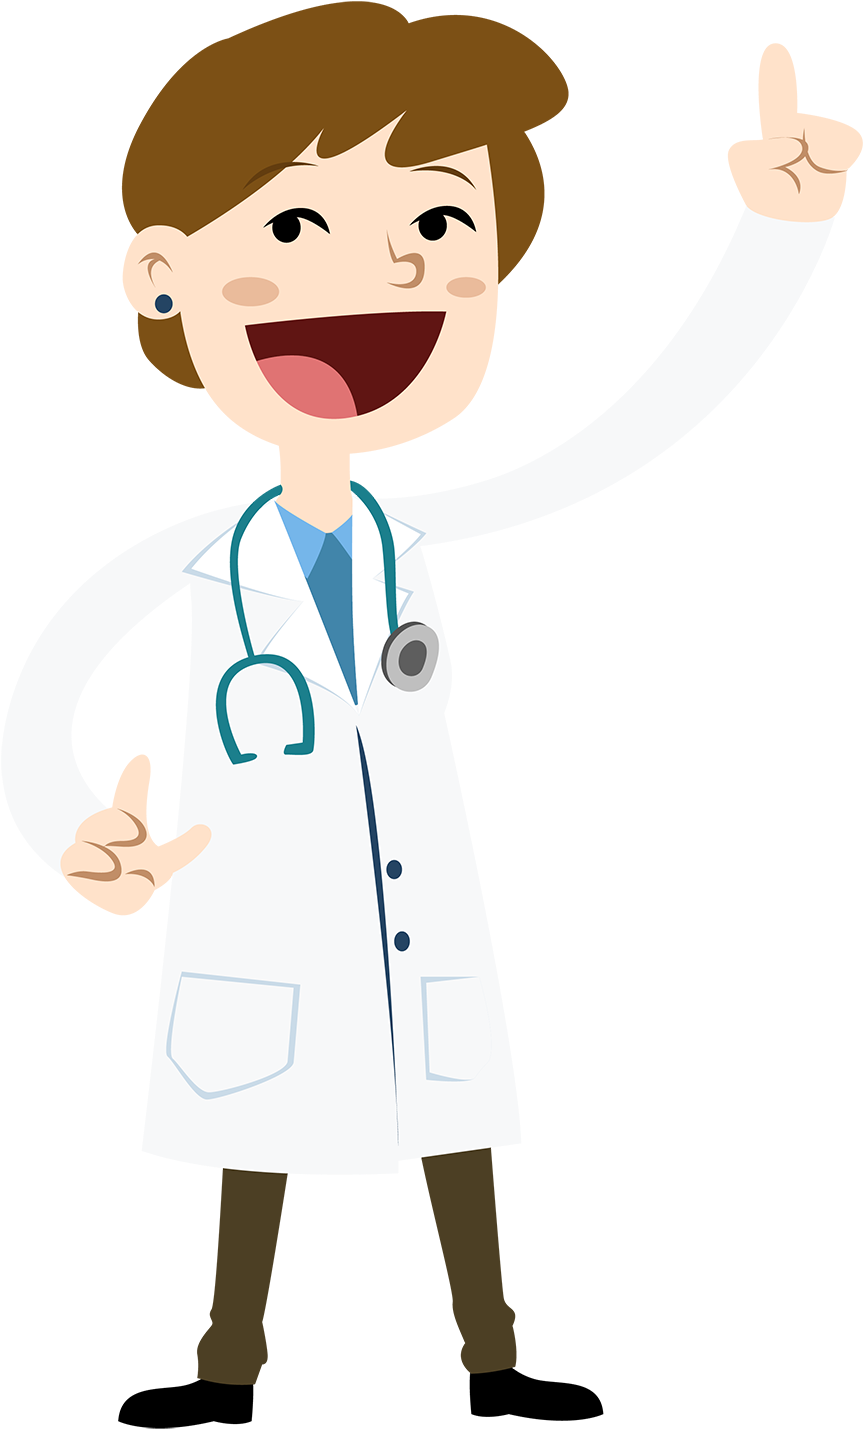 A Cartoon Of A Doctor With His Hand Up